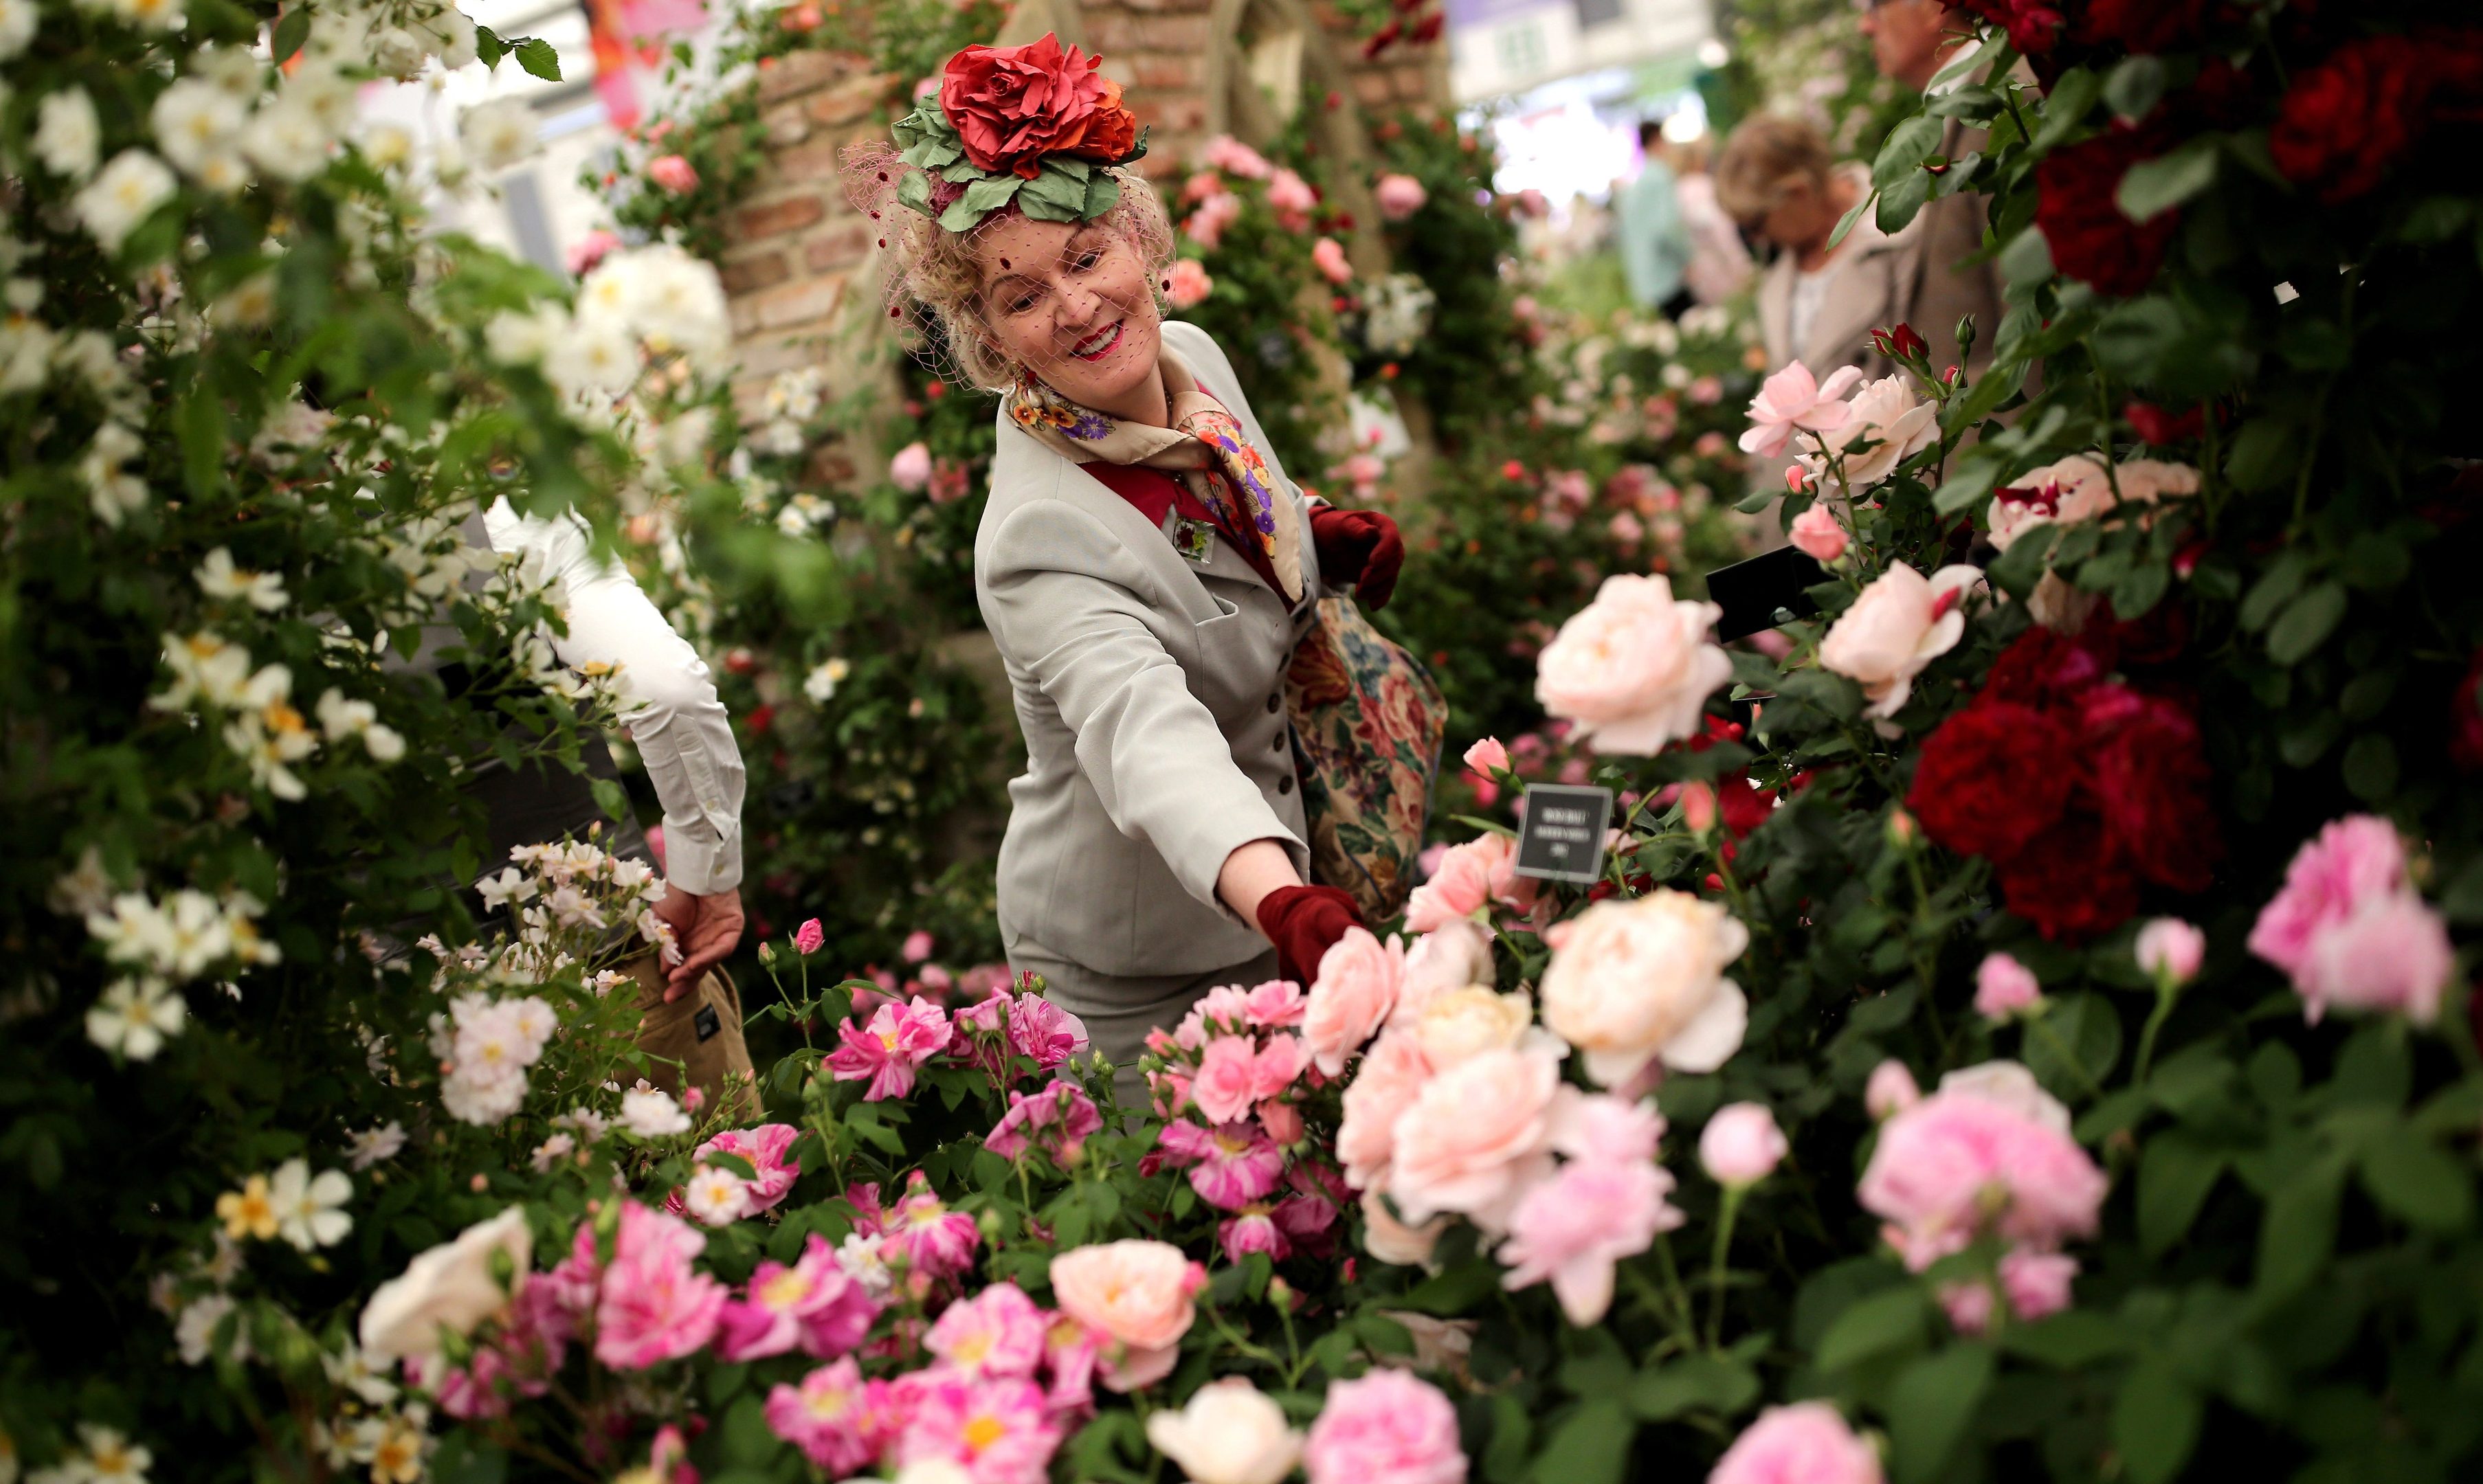 Members of the public enjoy the gardens at the 2016 Chelsea Flower Show at Royal Hospital Chelsea.